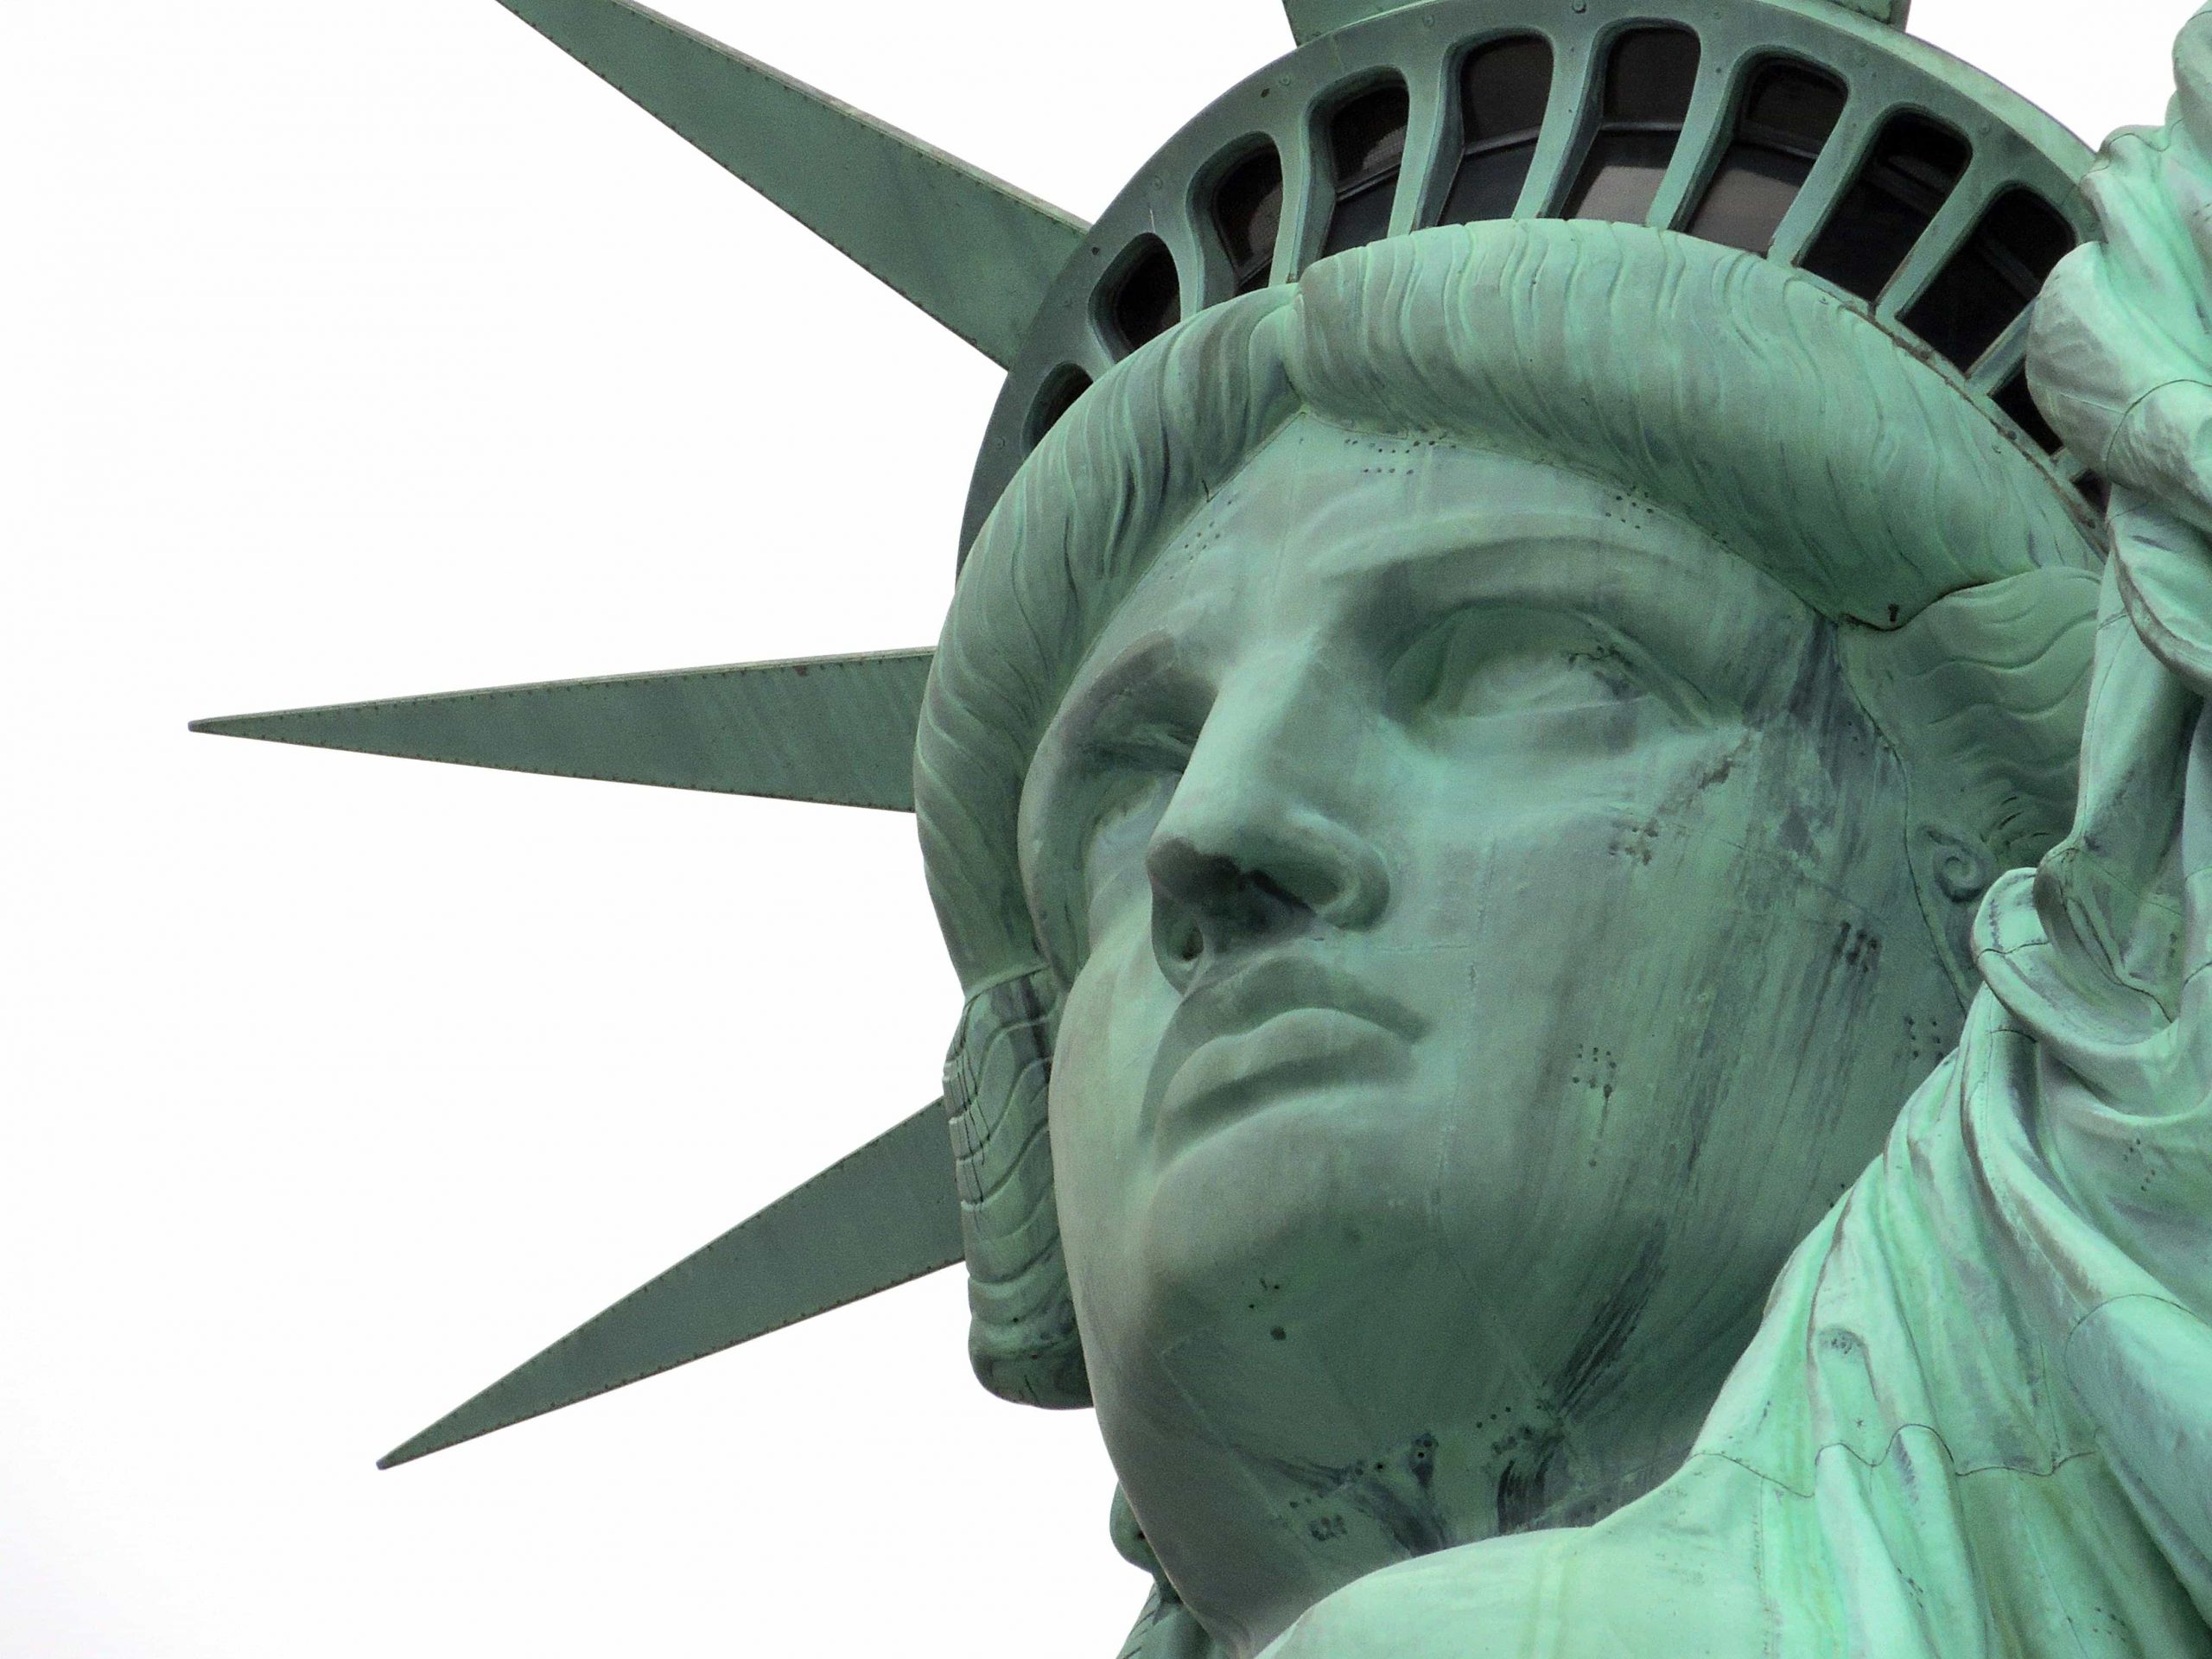 Face of the statue of liberty